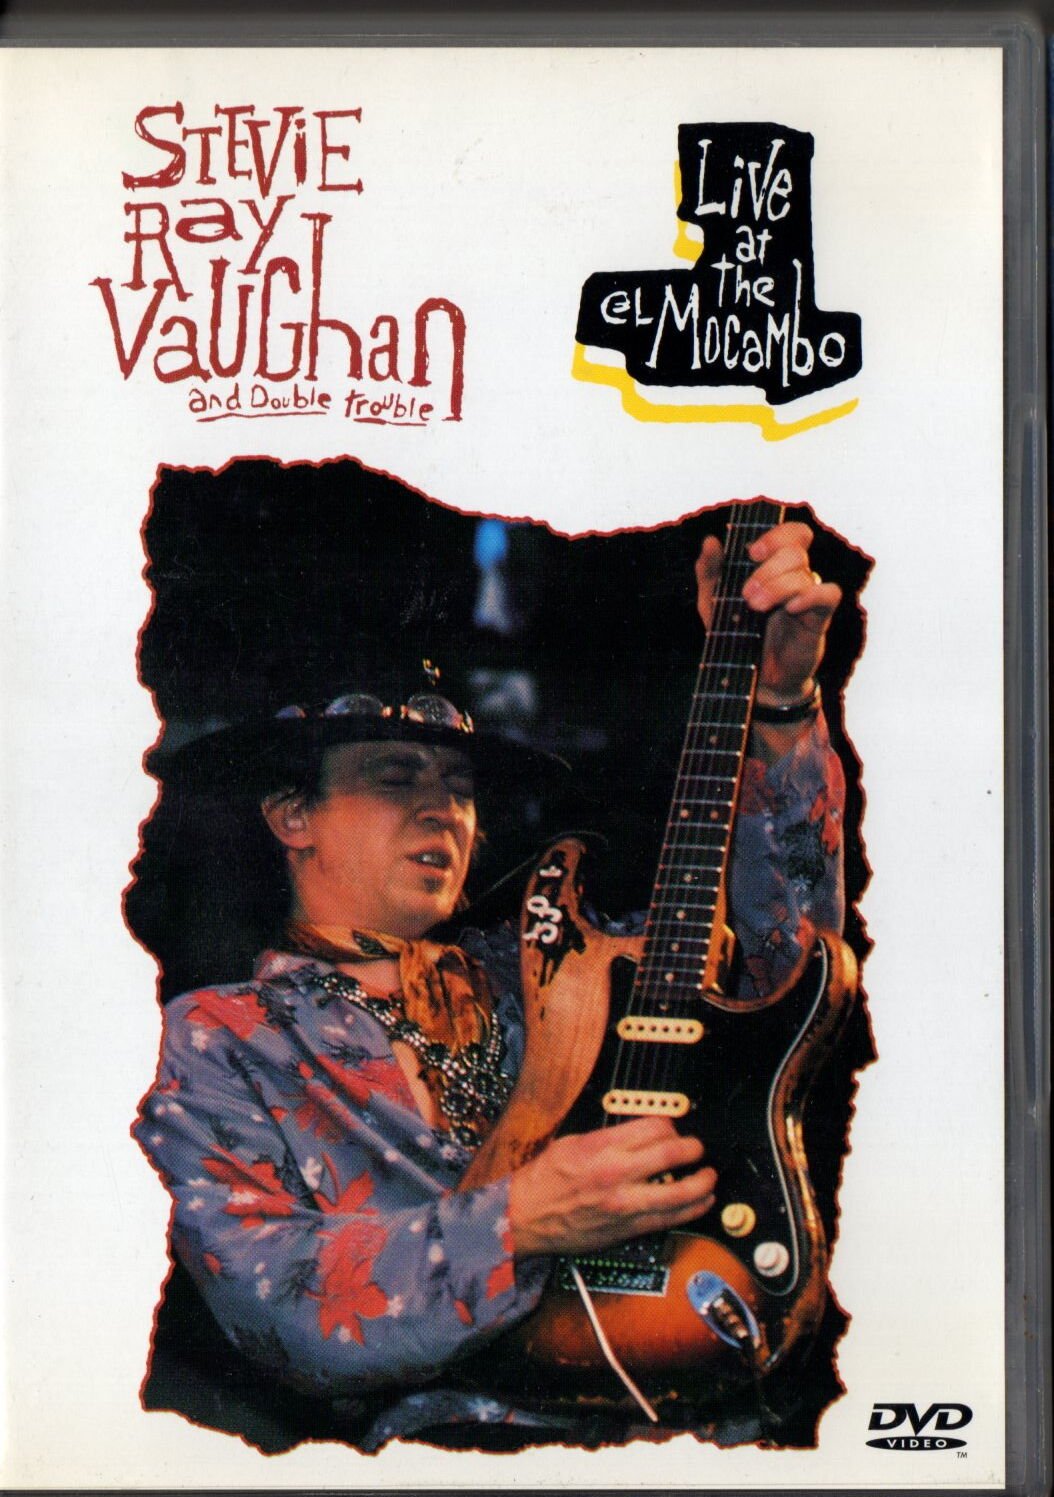 STEVIE RAY VAUGHAN AND DOUBLE TROUBLE – LIVE AT THE EL MOCAMBO (1991) - DVD 2.EL